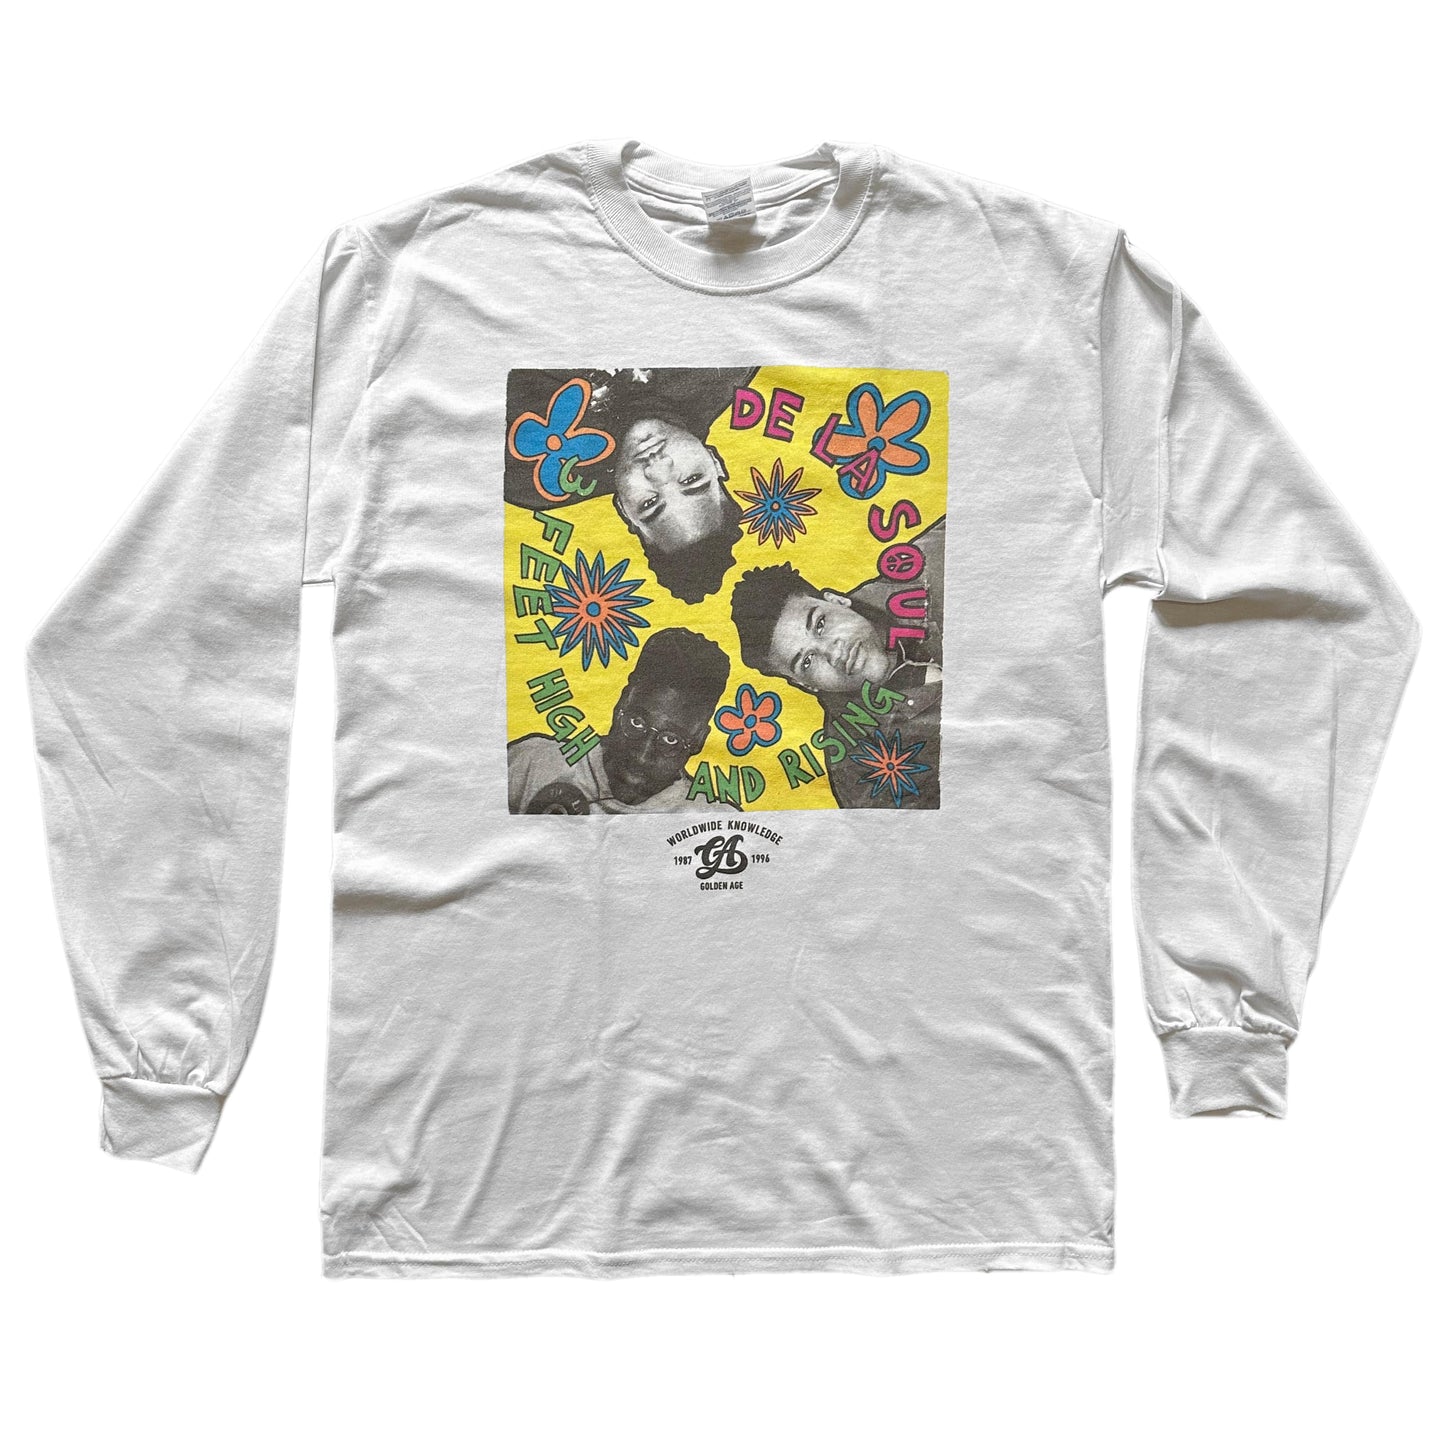 Golden Age 3 Feet High And Rising Long Sleeves Tee White